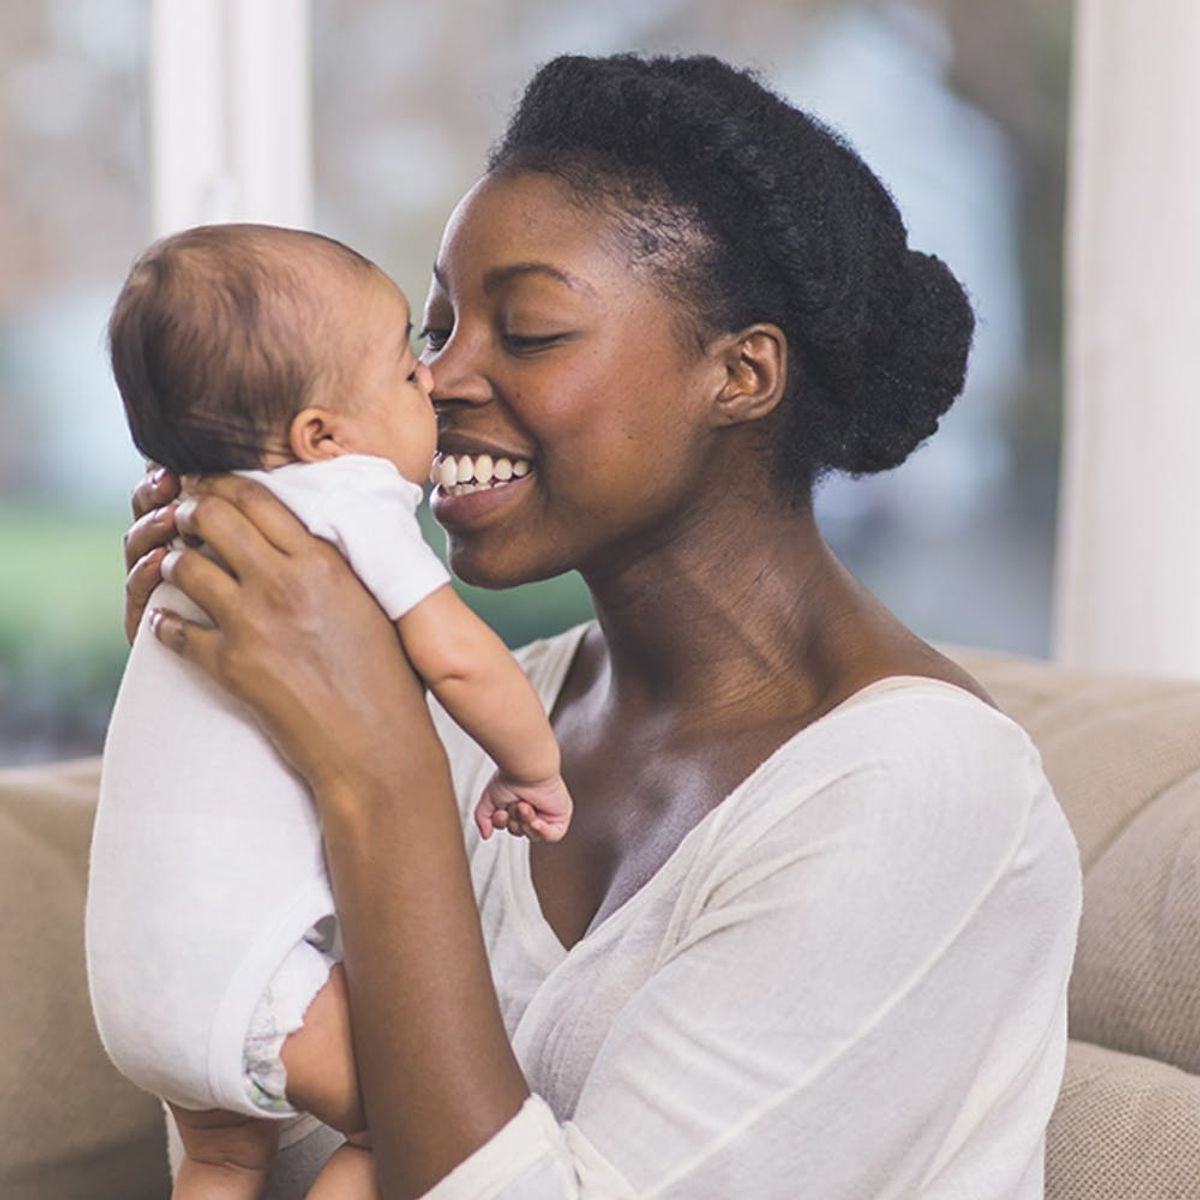 Here’s What to Expect from Your Baby’s First Month